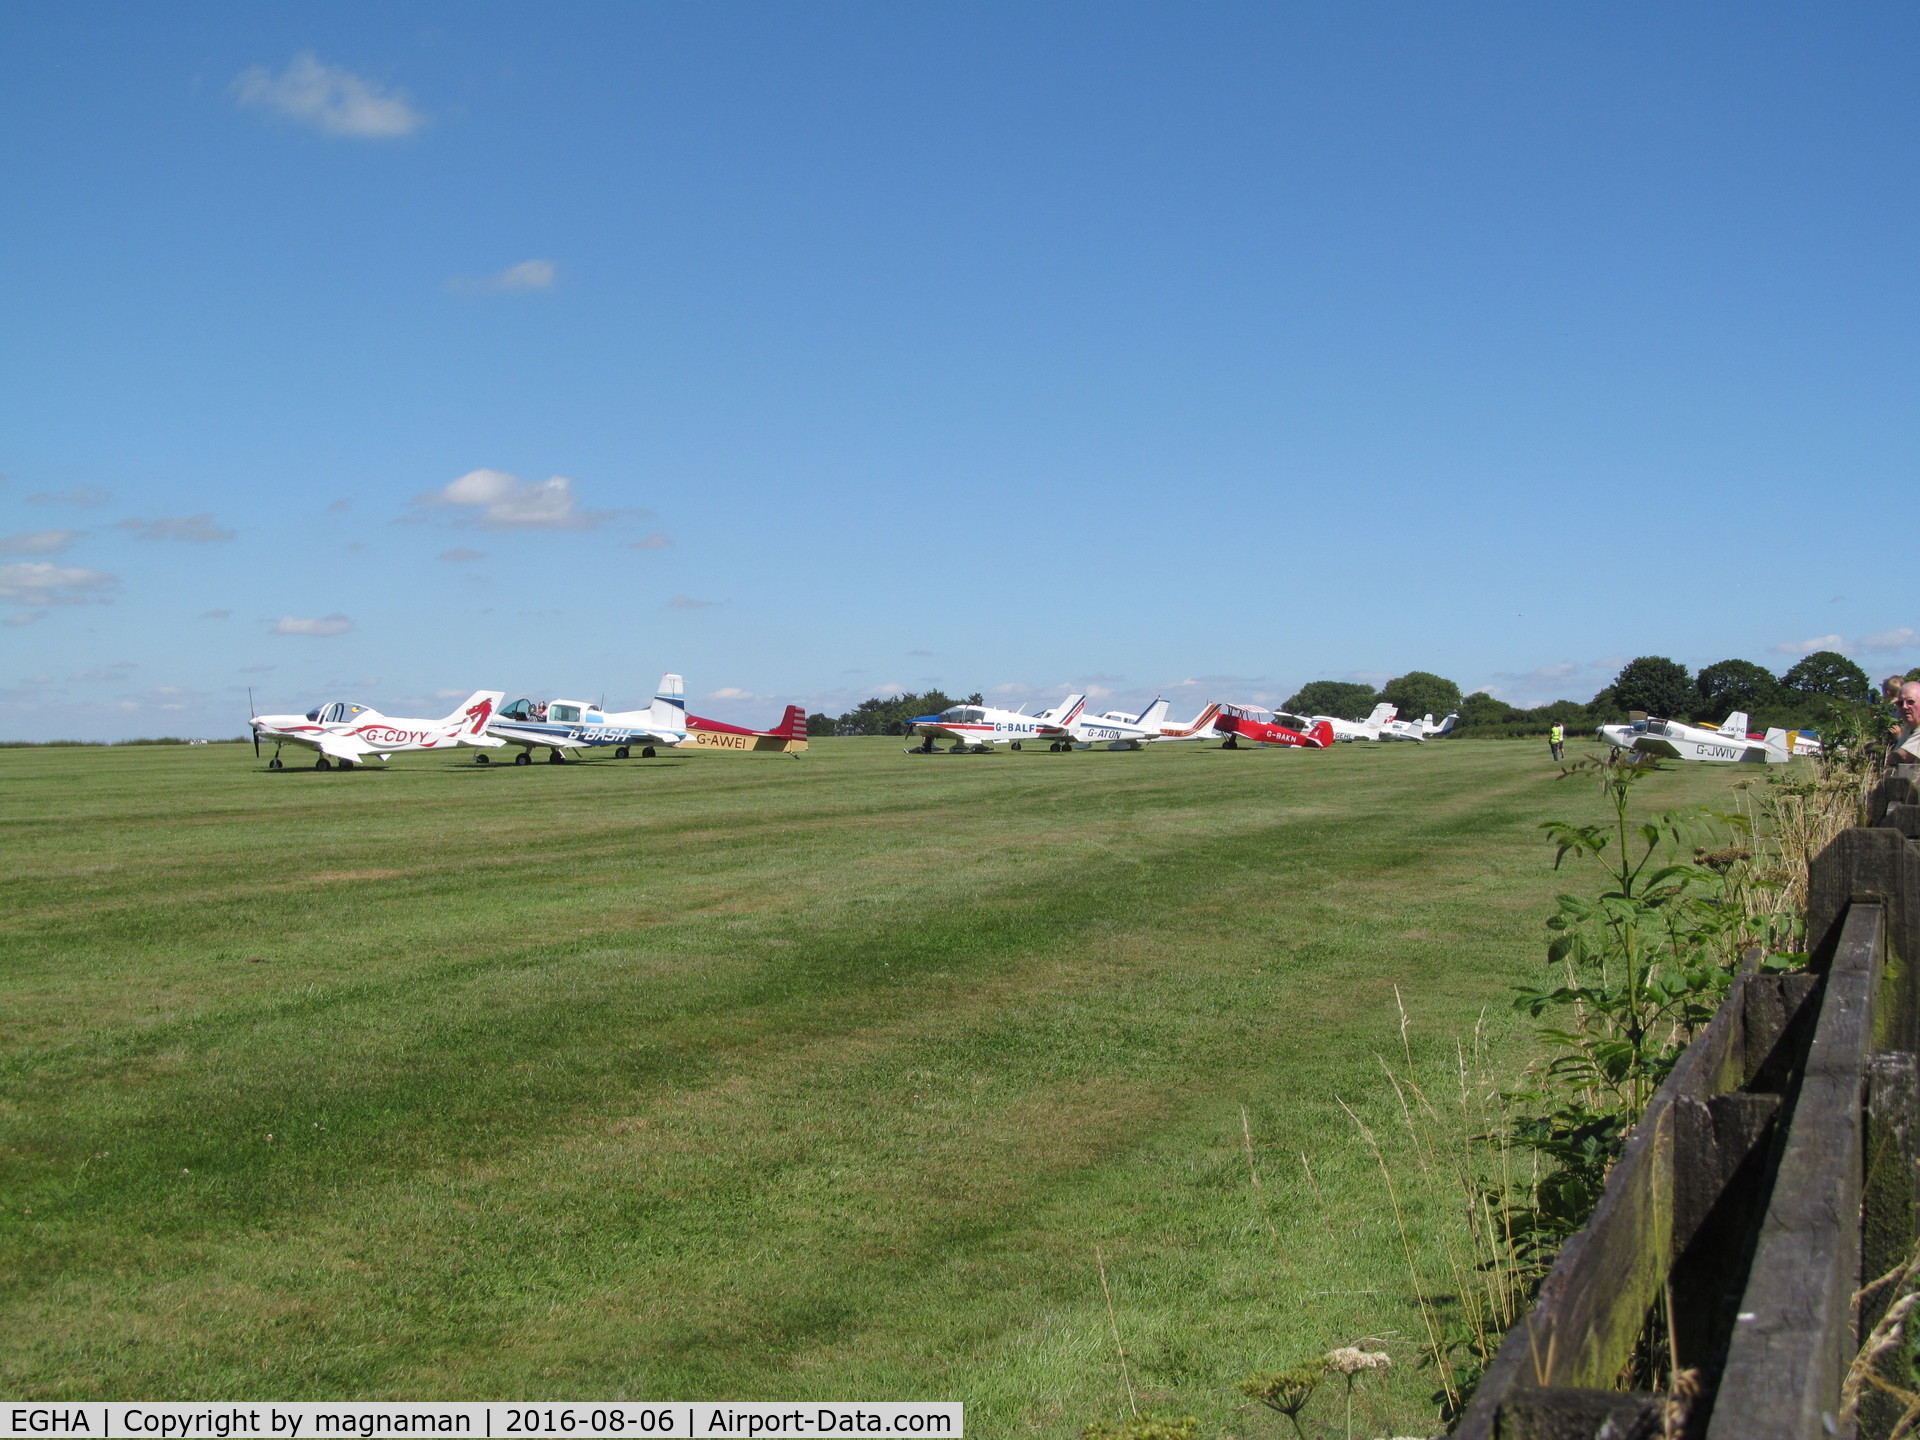 Compton Abbas Airfield Airport, Shaftesbury, England United Kingdom (EGHA) - Fly in today - great weather